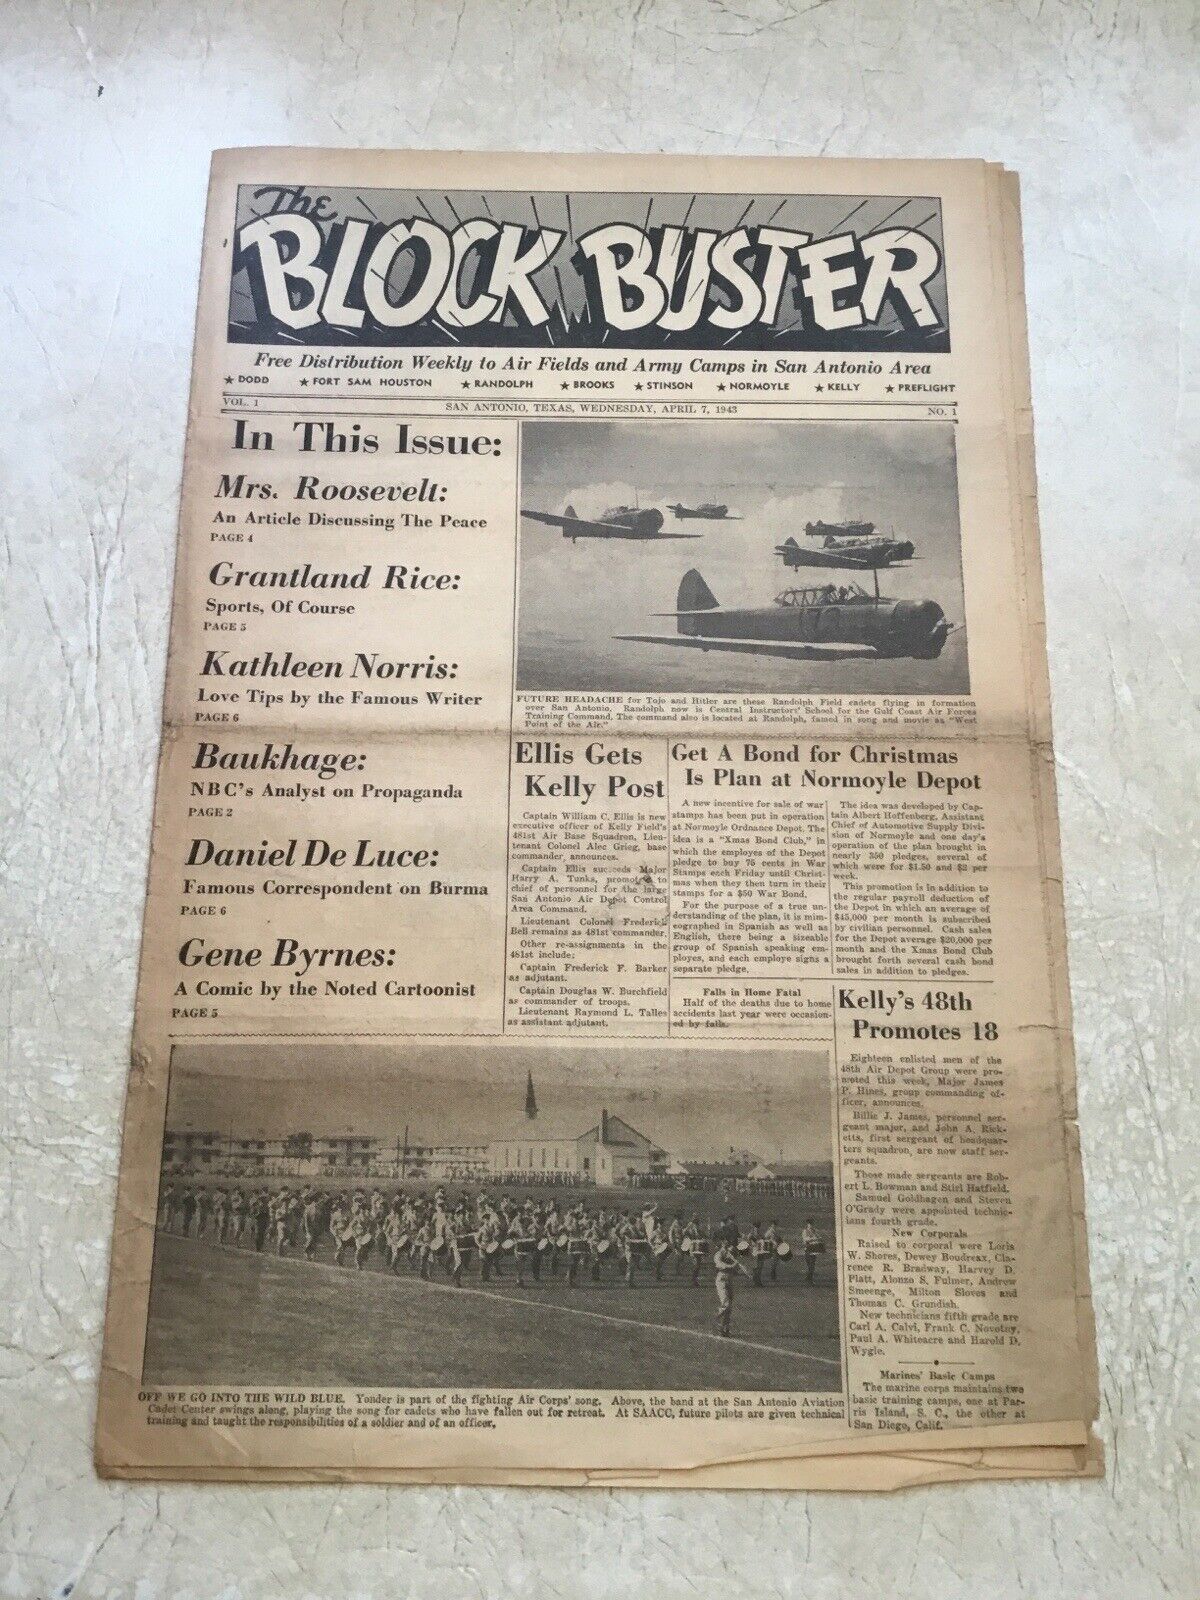 SOLDIERS SEAC Newspapers BLOCK BUSTER 1943 TEXAS AIR FIELD & ARMY FDR